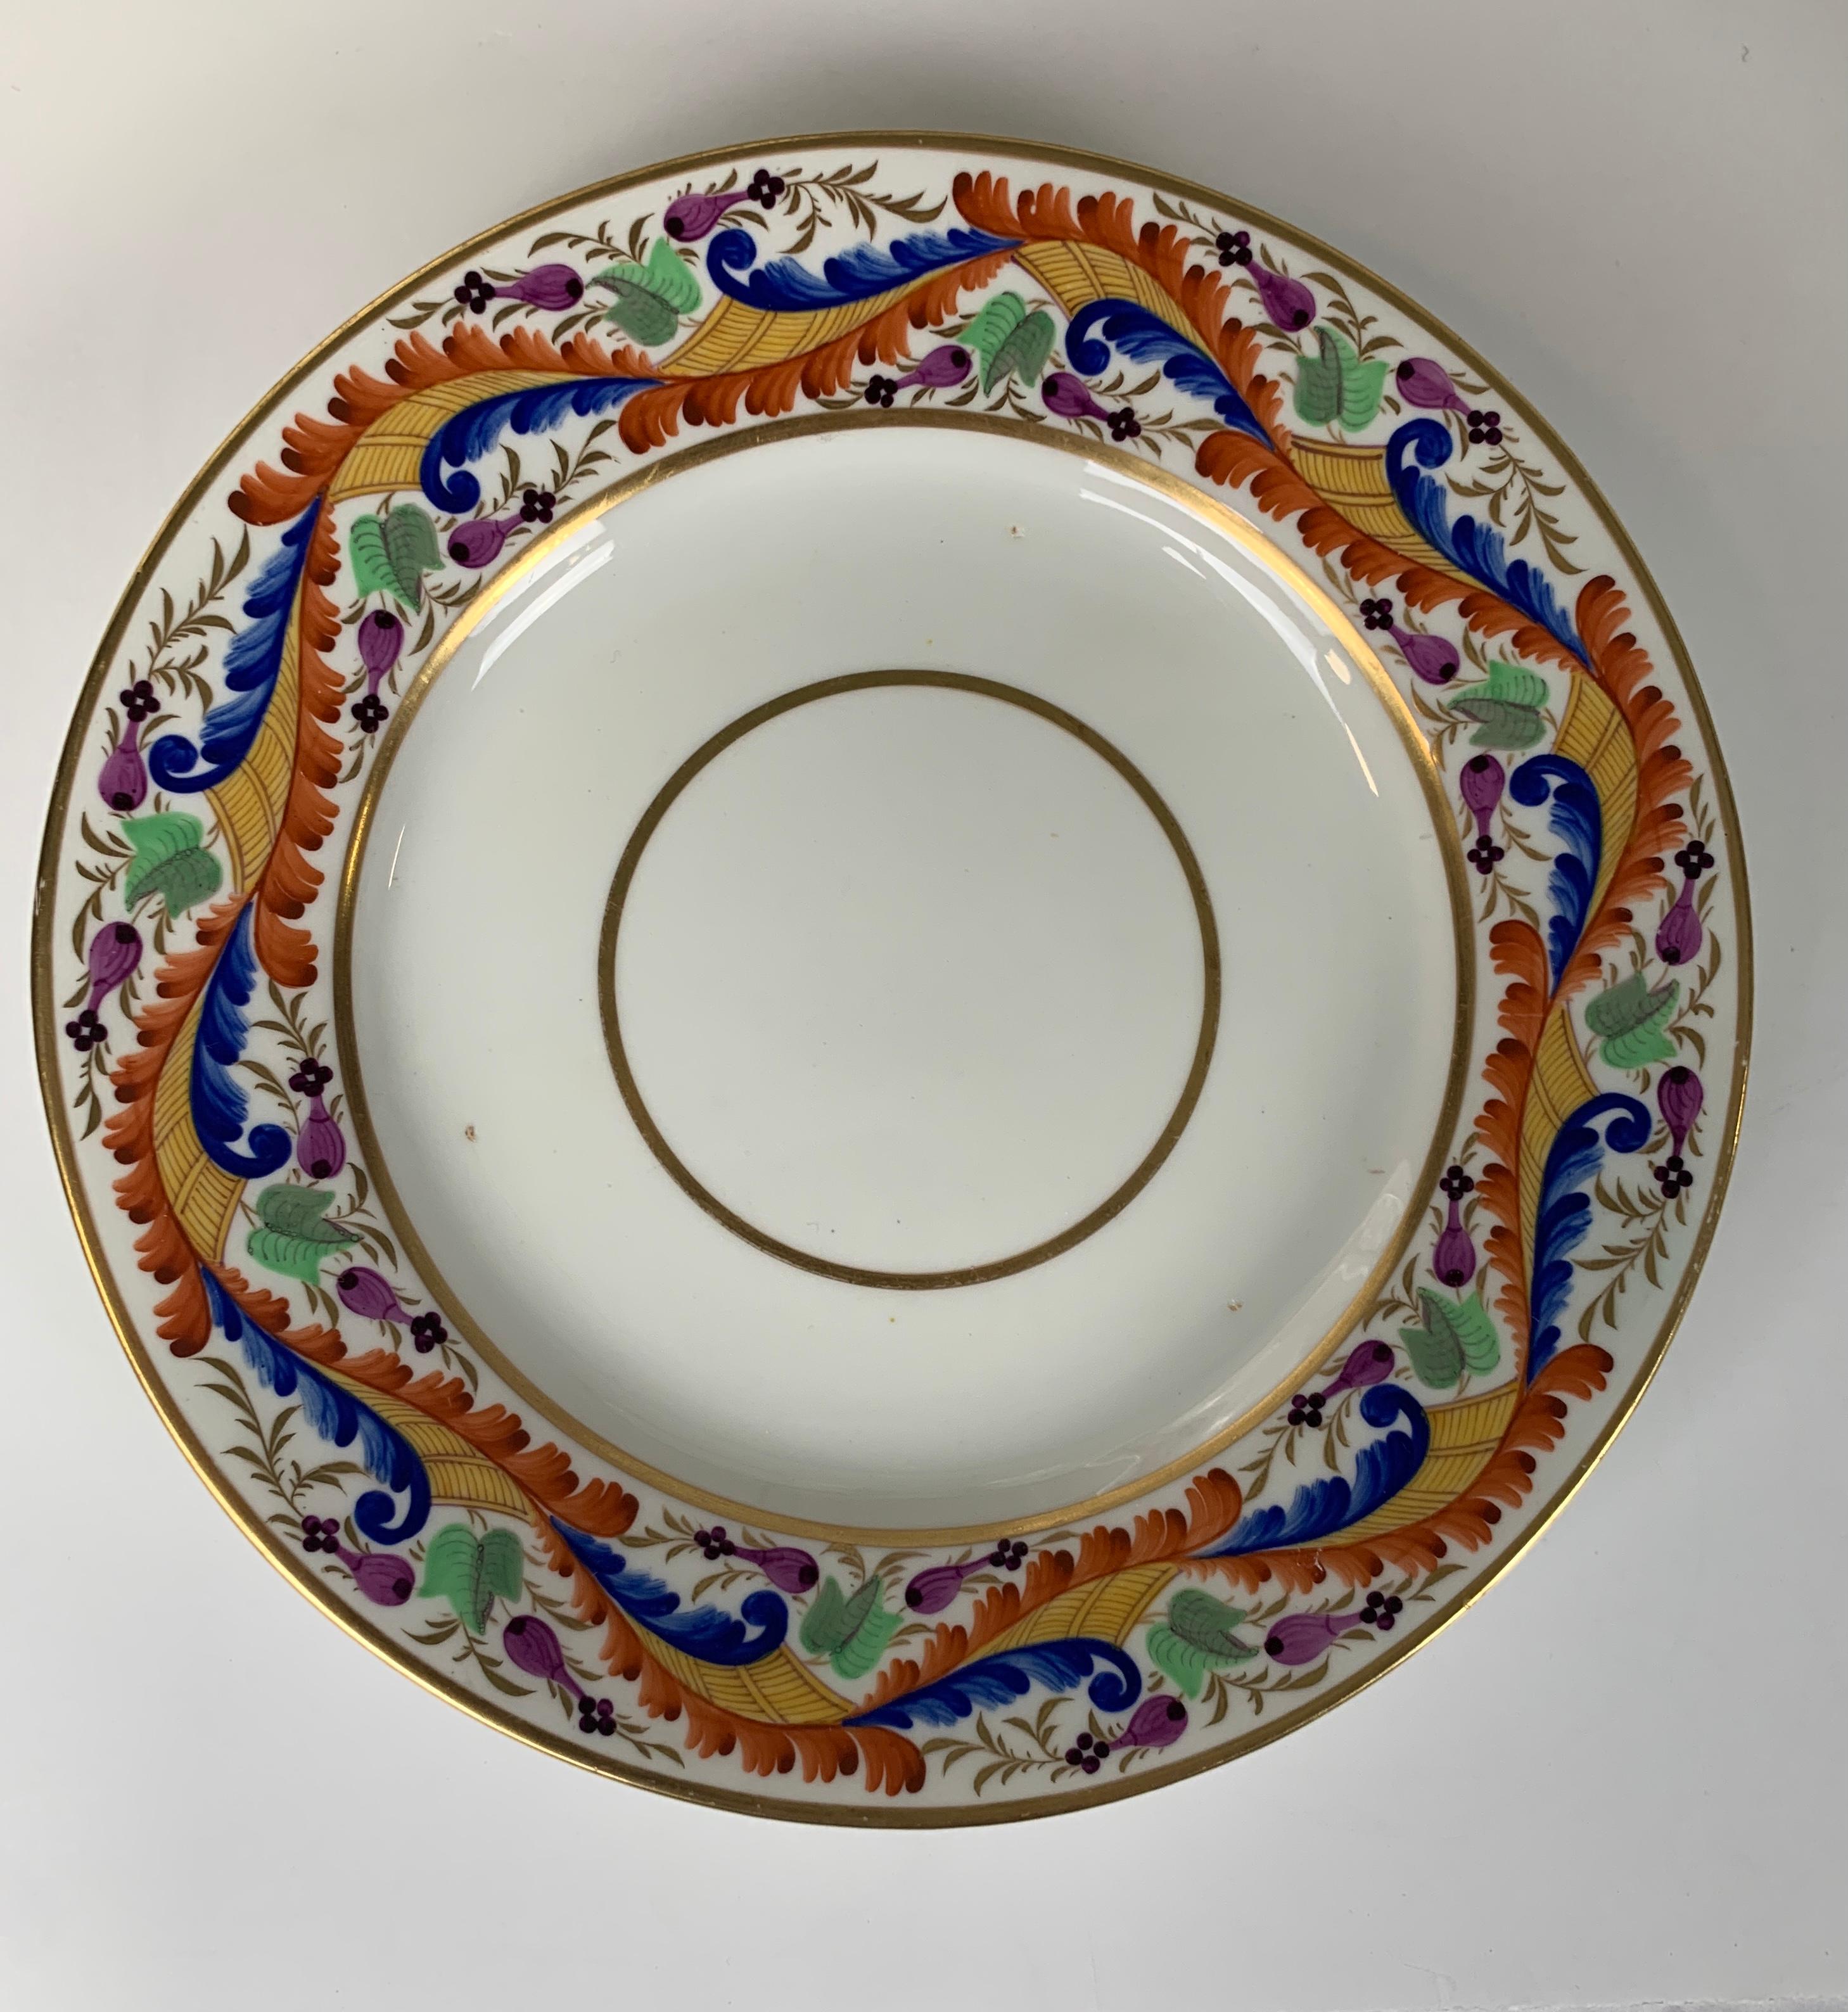 English Set of Five Derby Dishes Hand-Painted in England, circa 1810